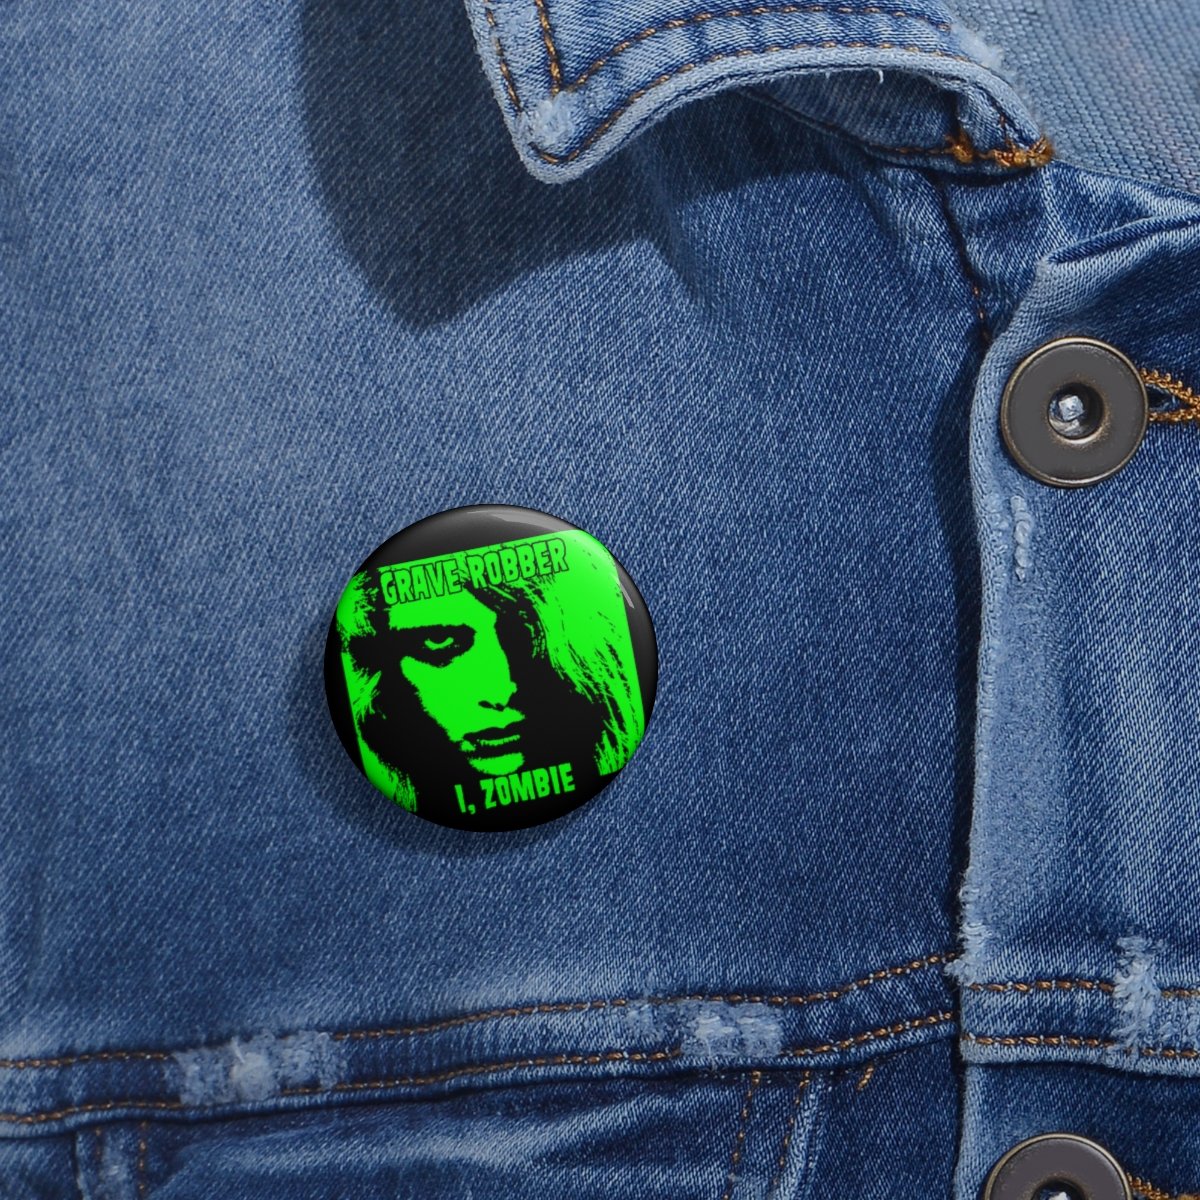 Grave Robber – I, Zombie Pin Buttons